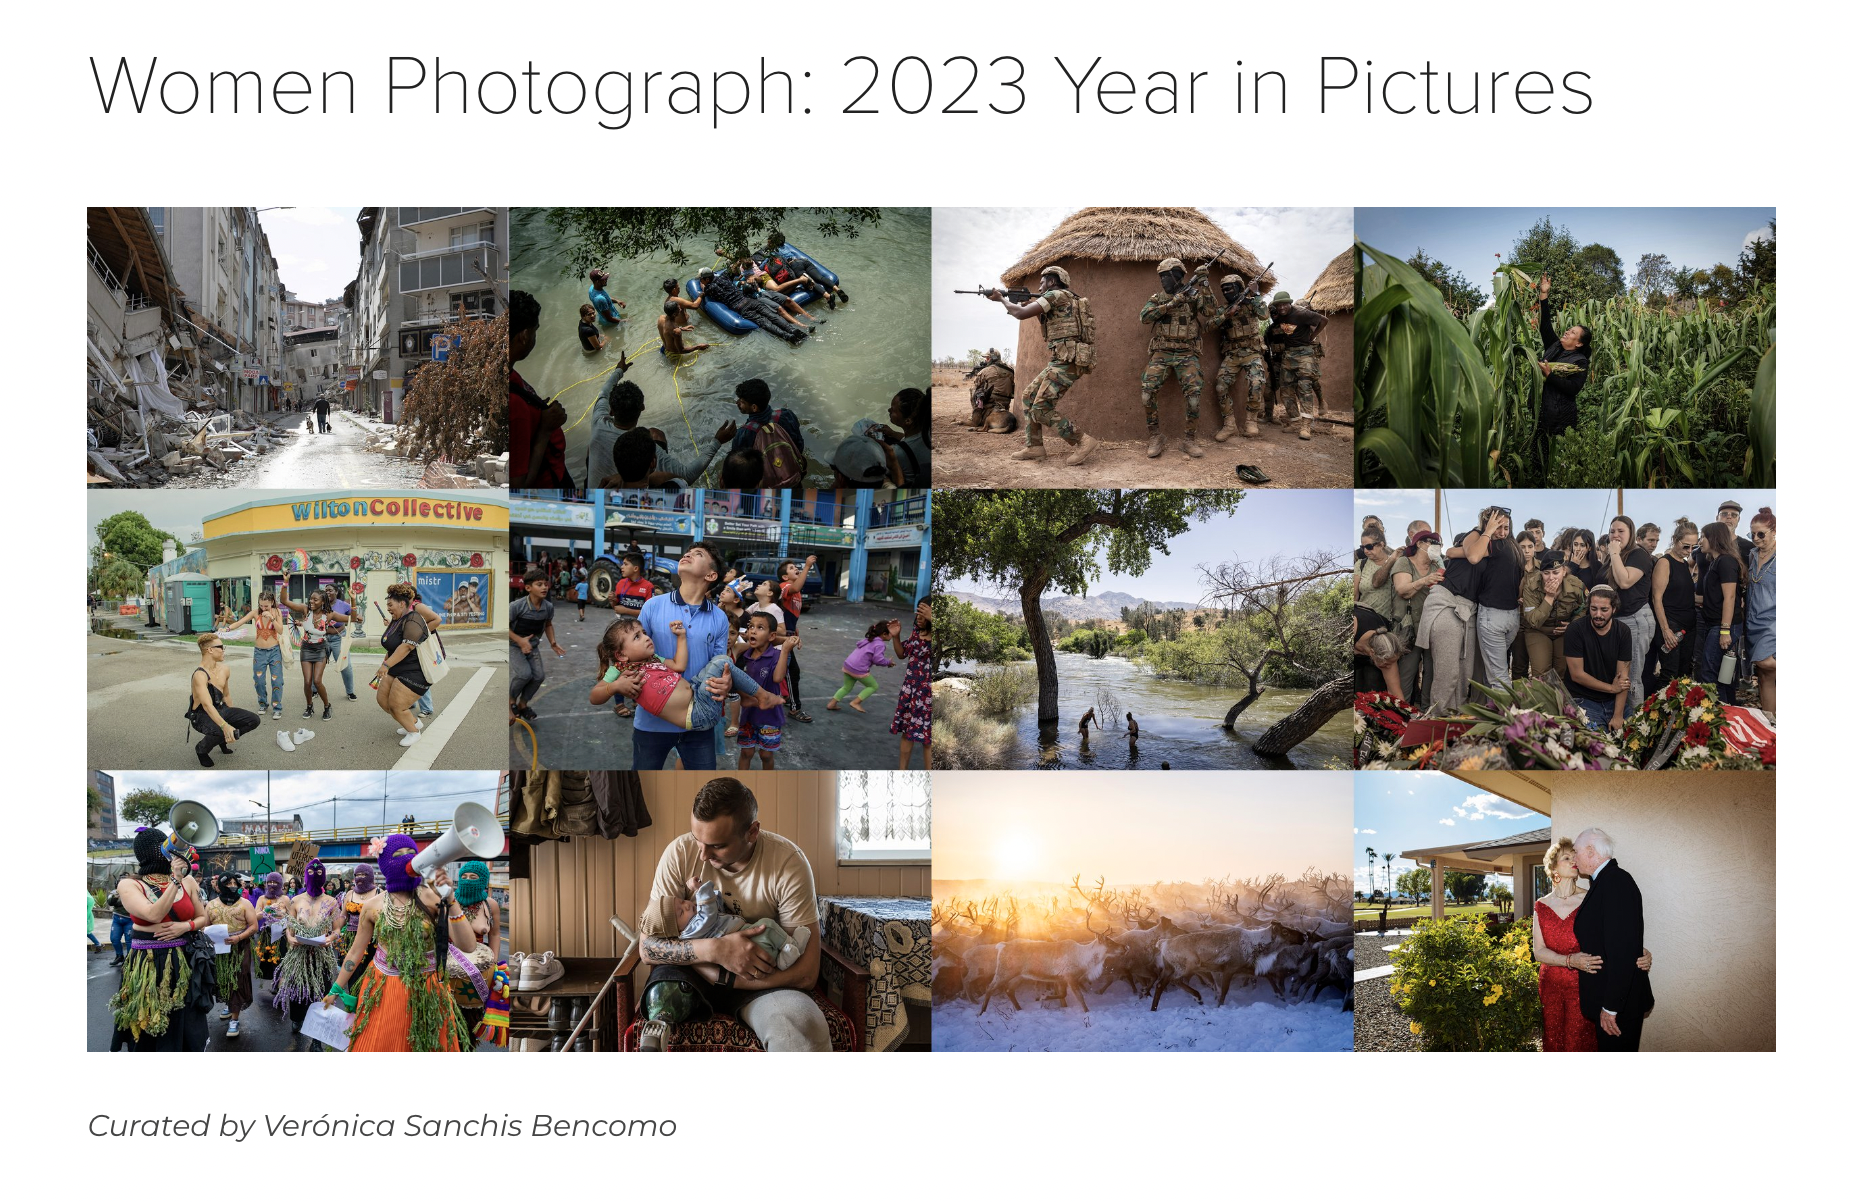 Women Photograph: 2023 Year in Pictures